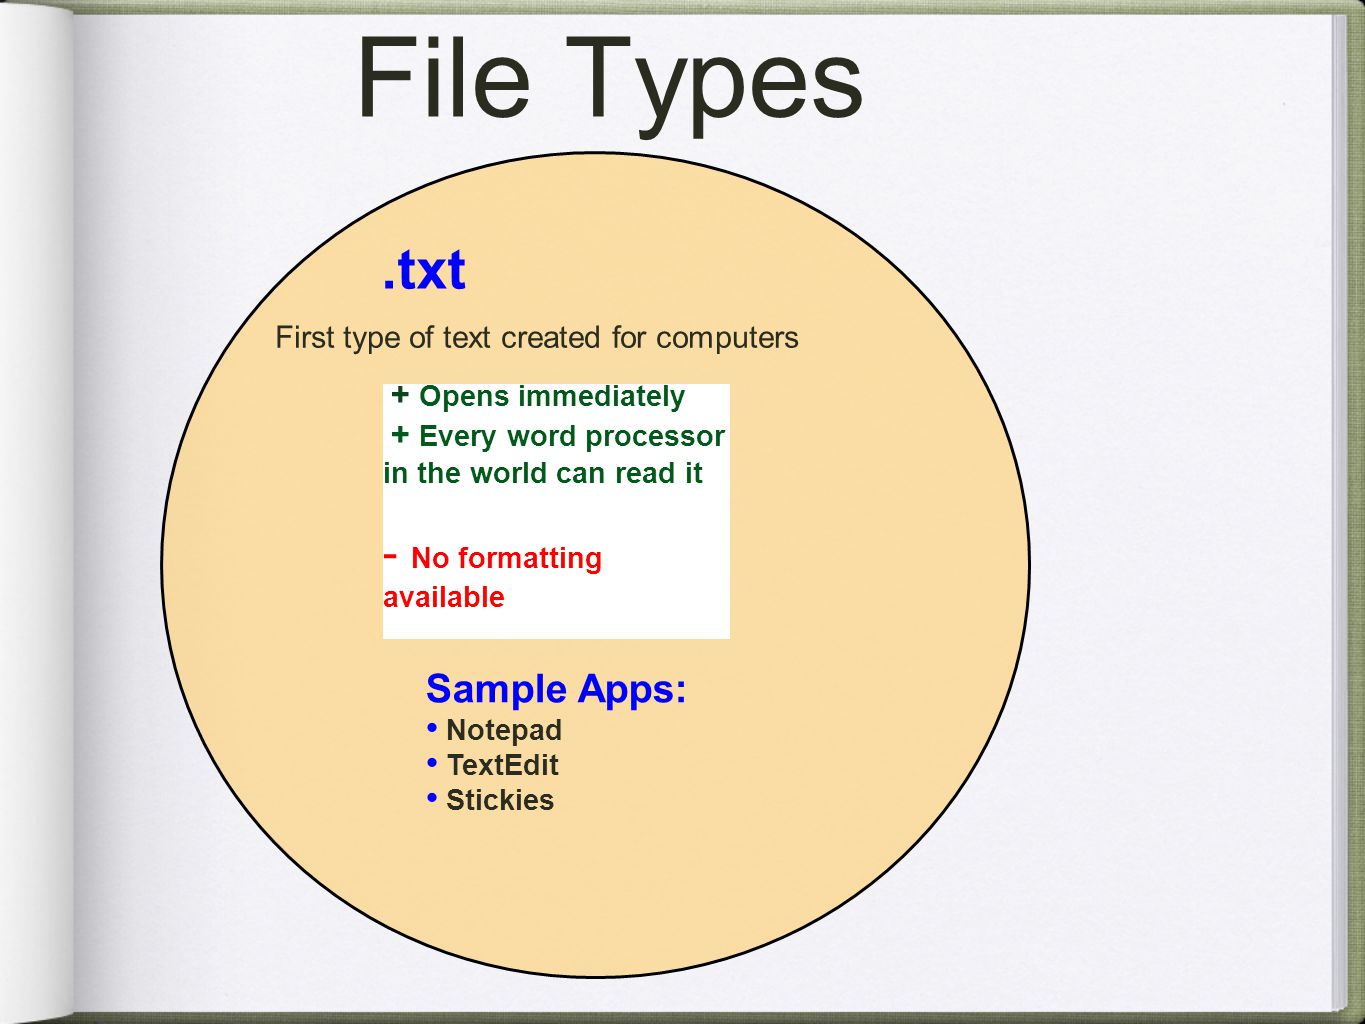 File Types.txt Sample Apps: Notepad TextEdit Stickies + Opens immediately + Every word processor in the world can read it - No formatting available.txt First type of text created for computers